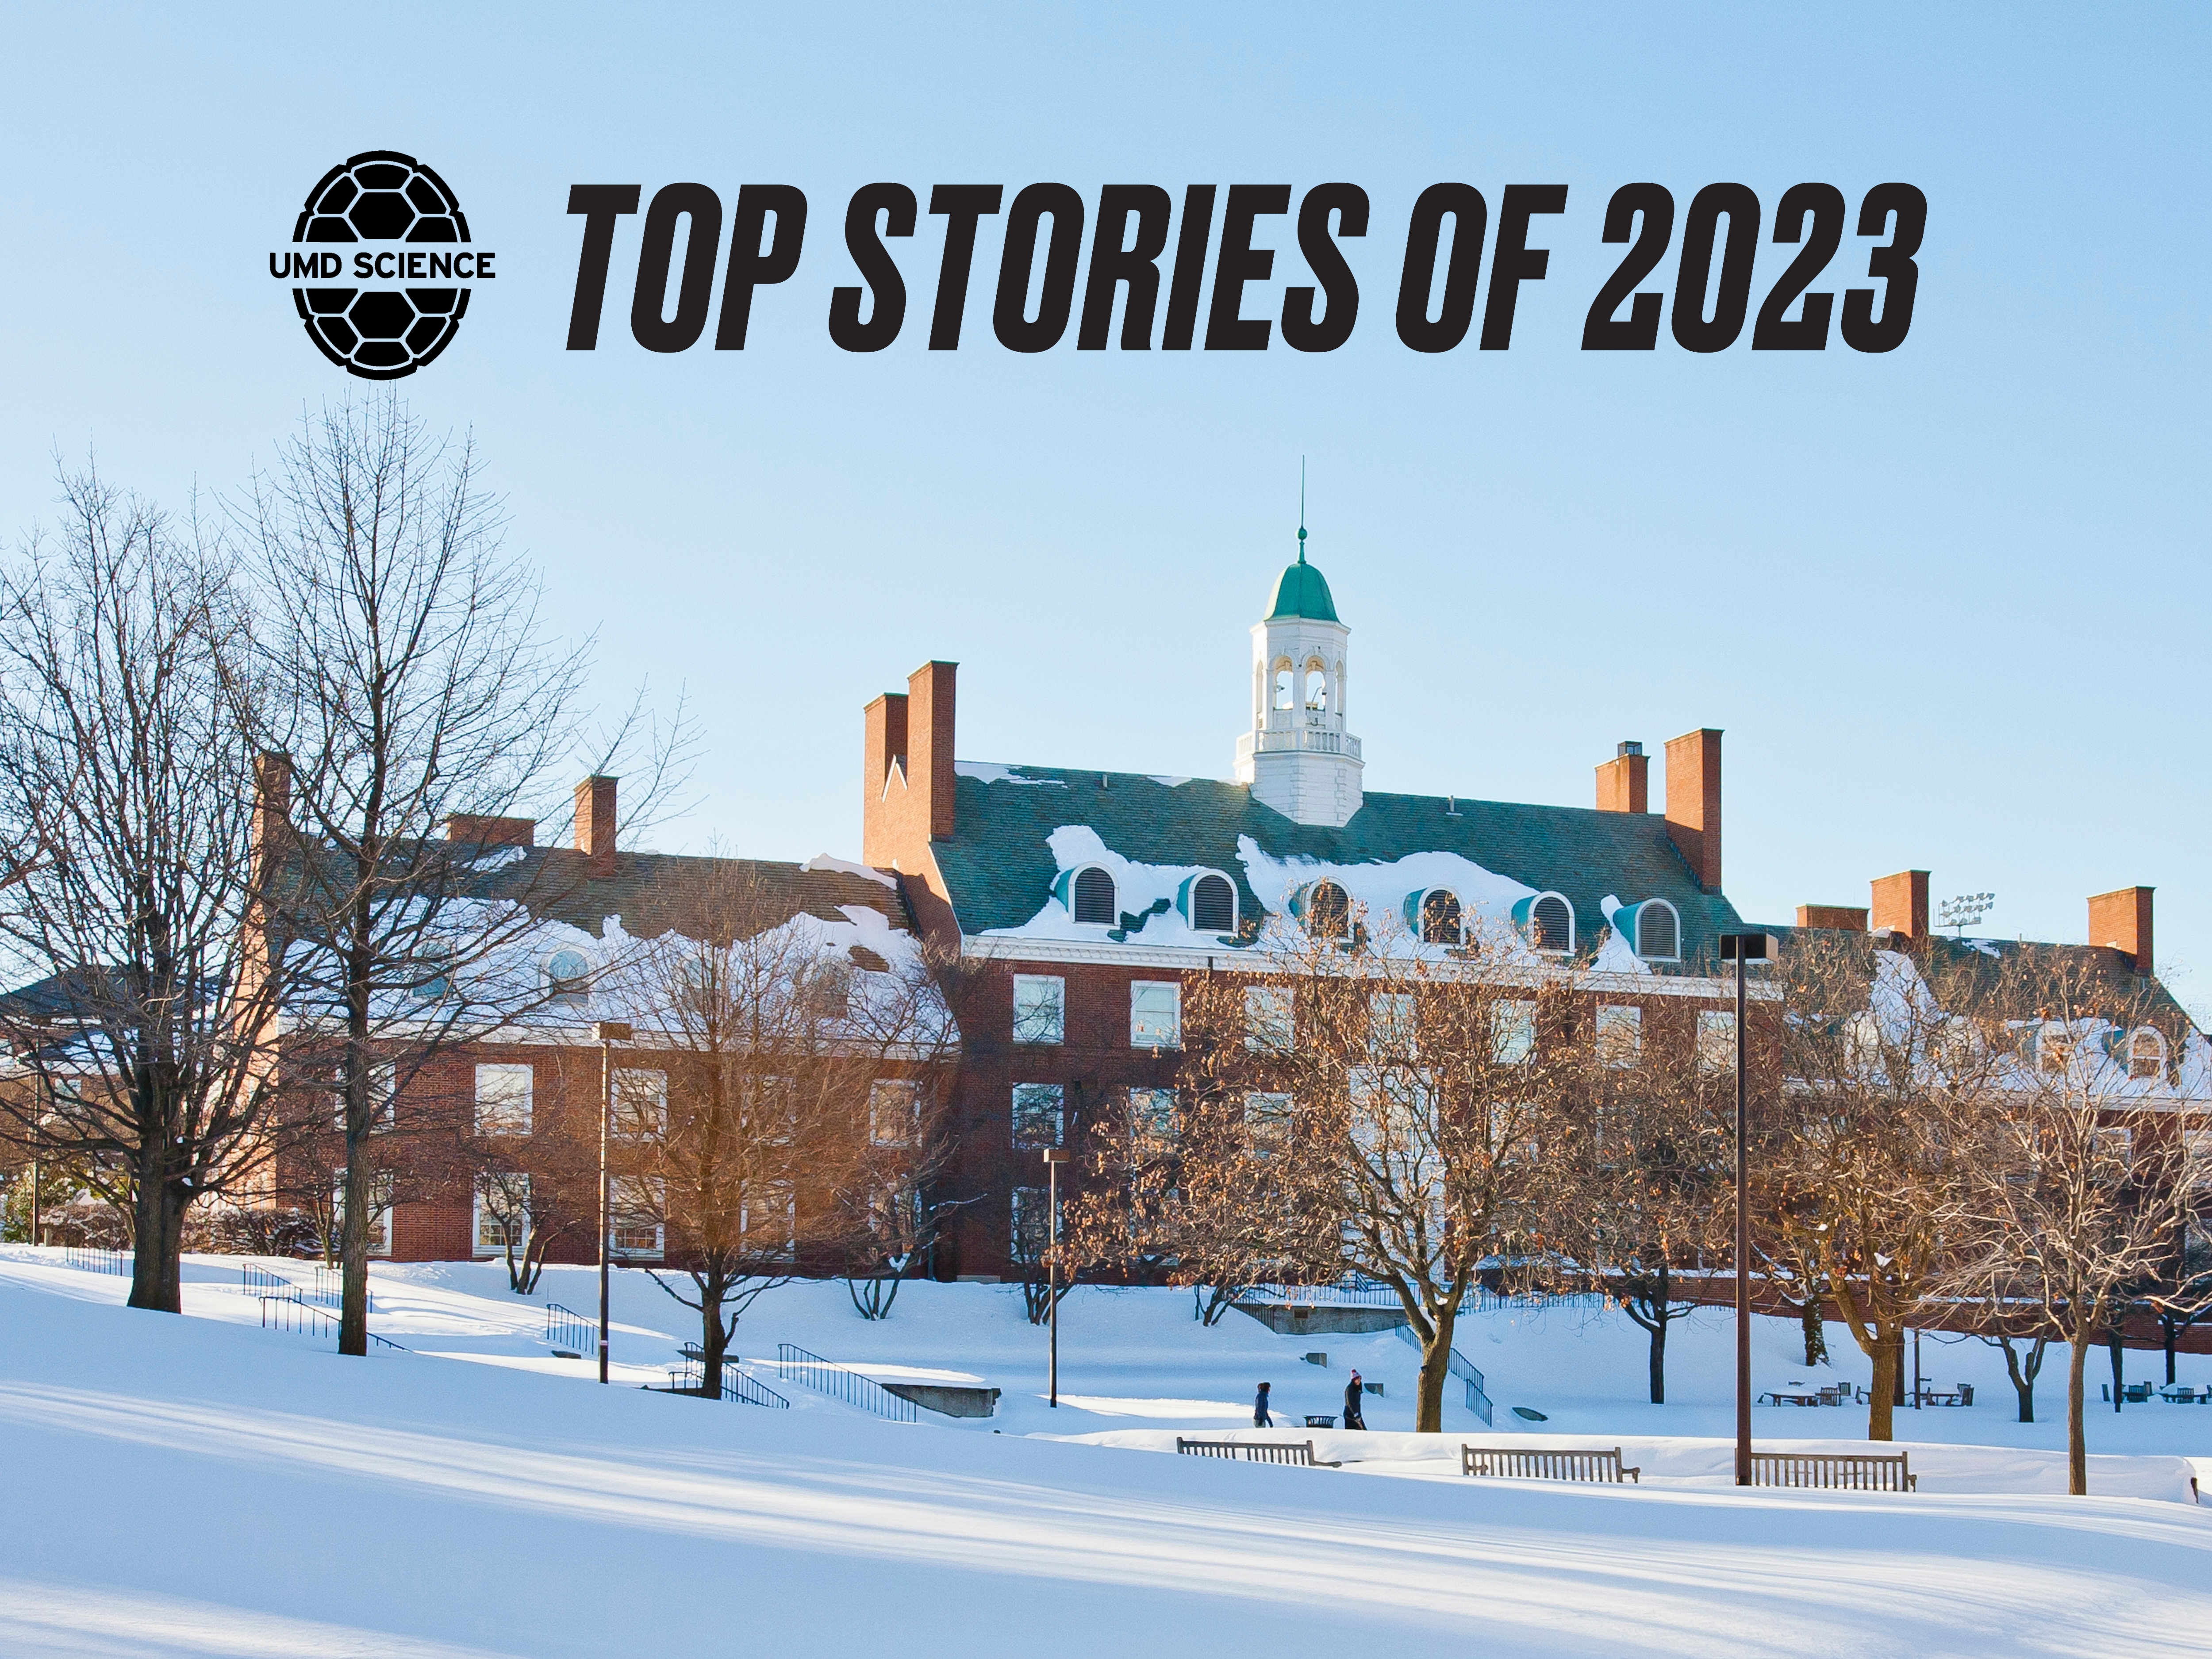 "Top Stories of 2023" over a background of the Microbiology Building on a snowy day